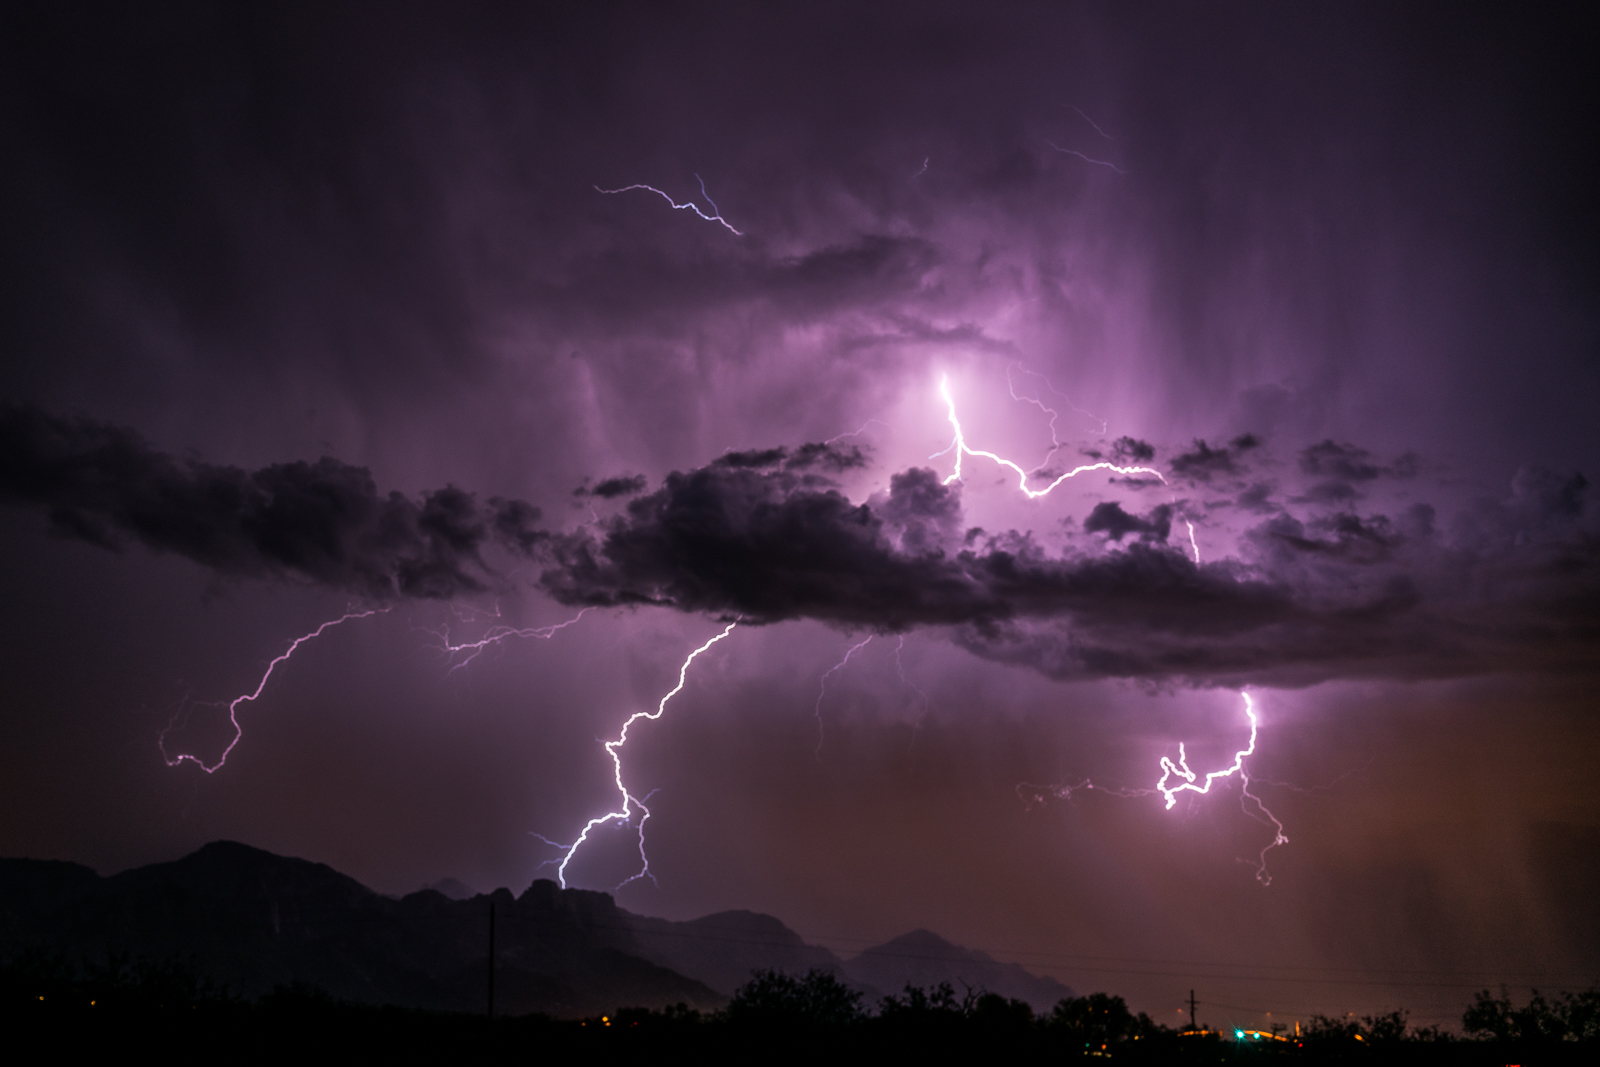 Lightning and storm over the Santa Catalina Mountains. August 2016.